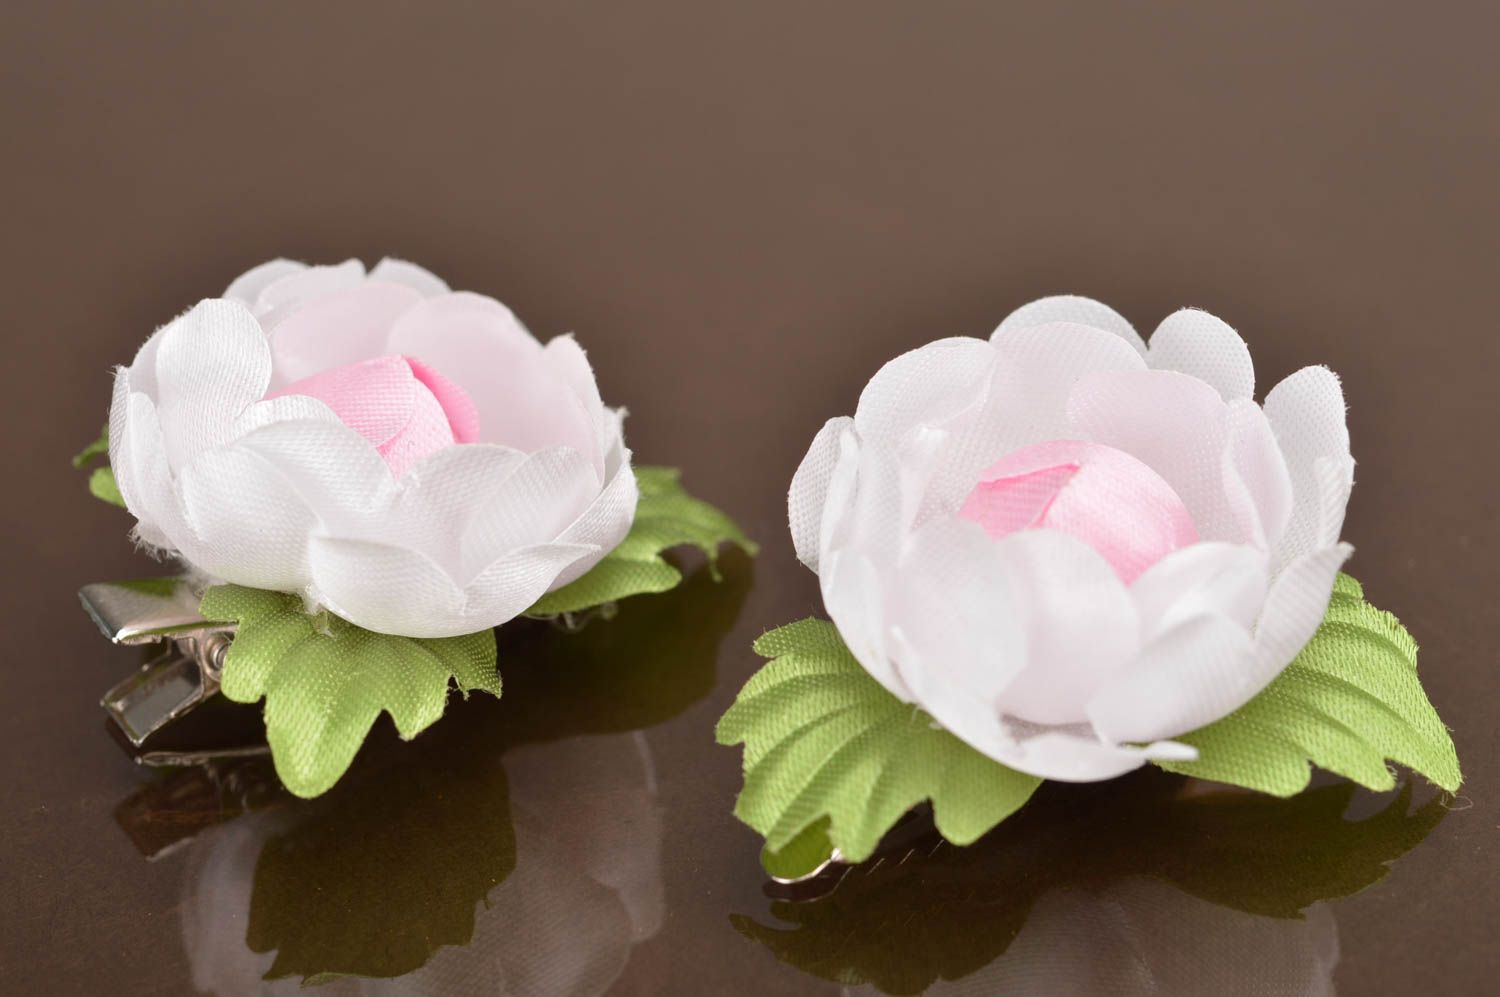 Handmade small tender pink flower hair clips made of fabric set of 2 pieces photo 2